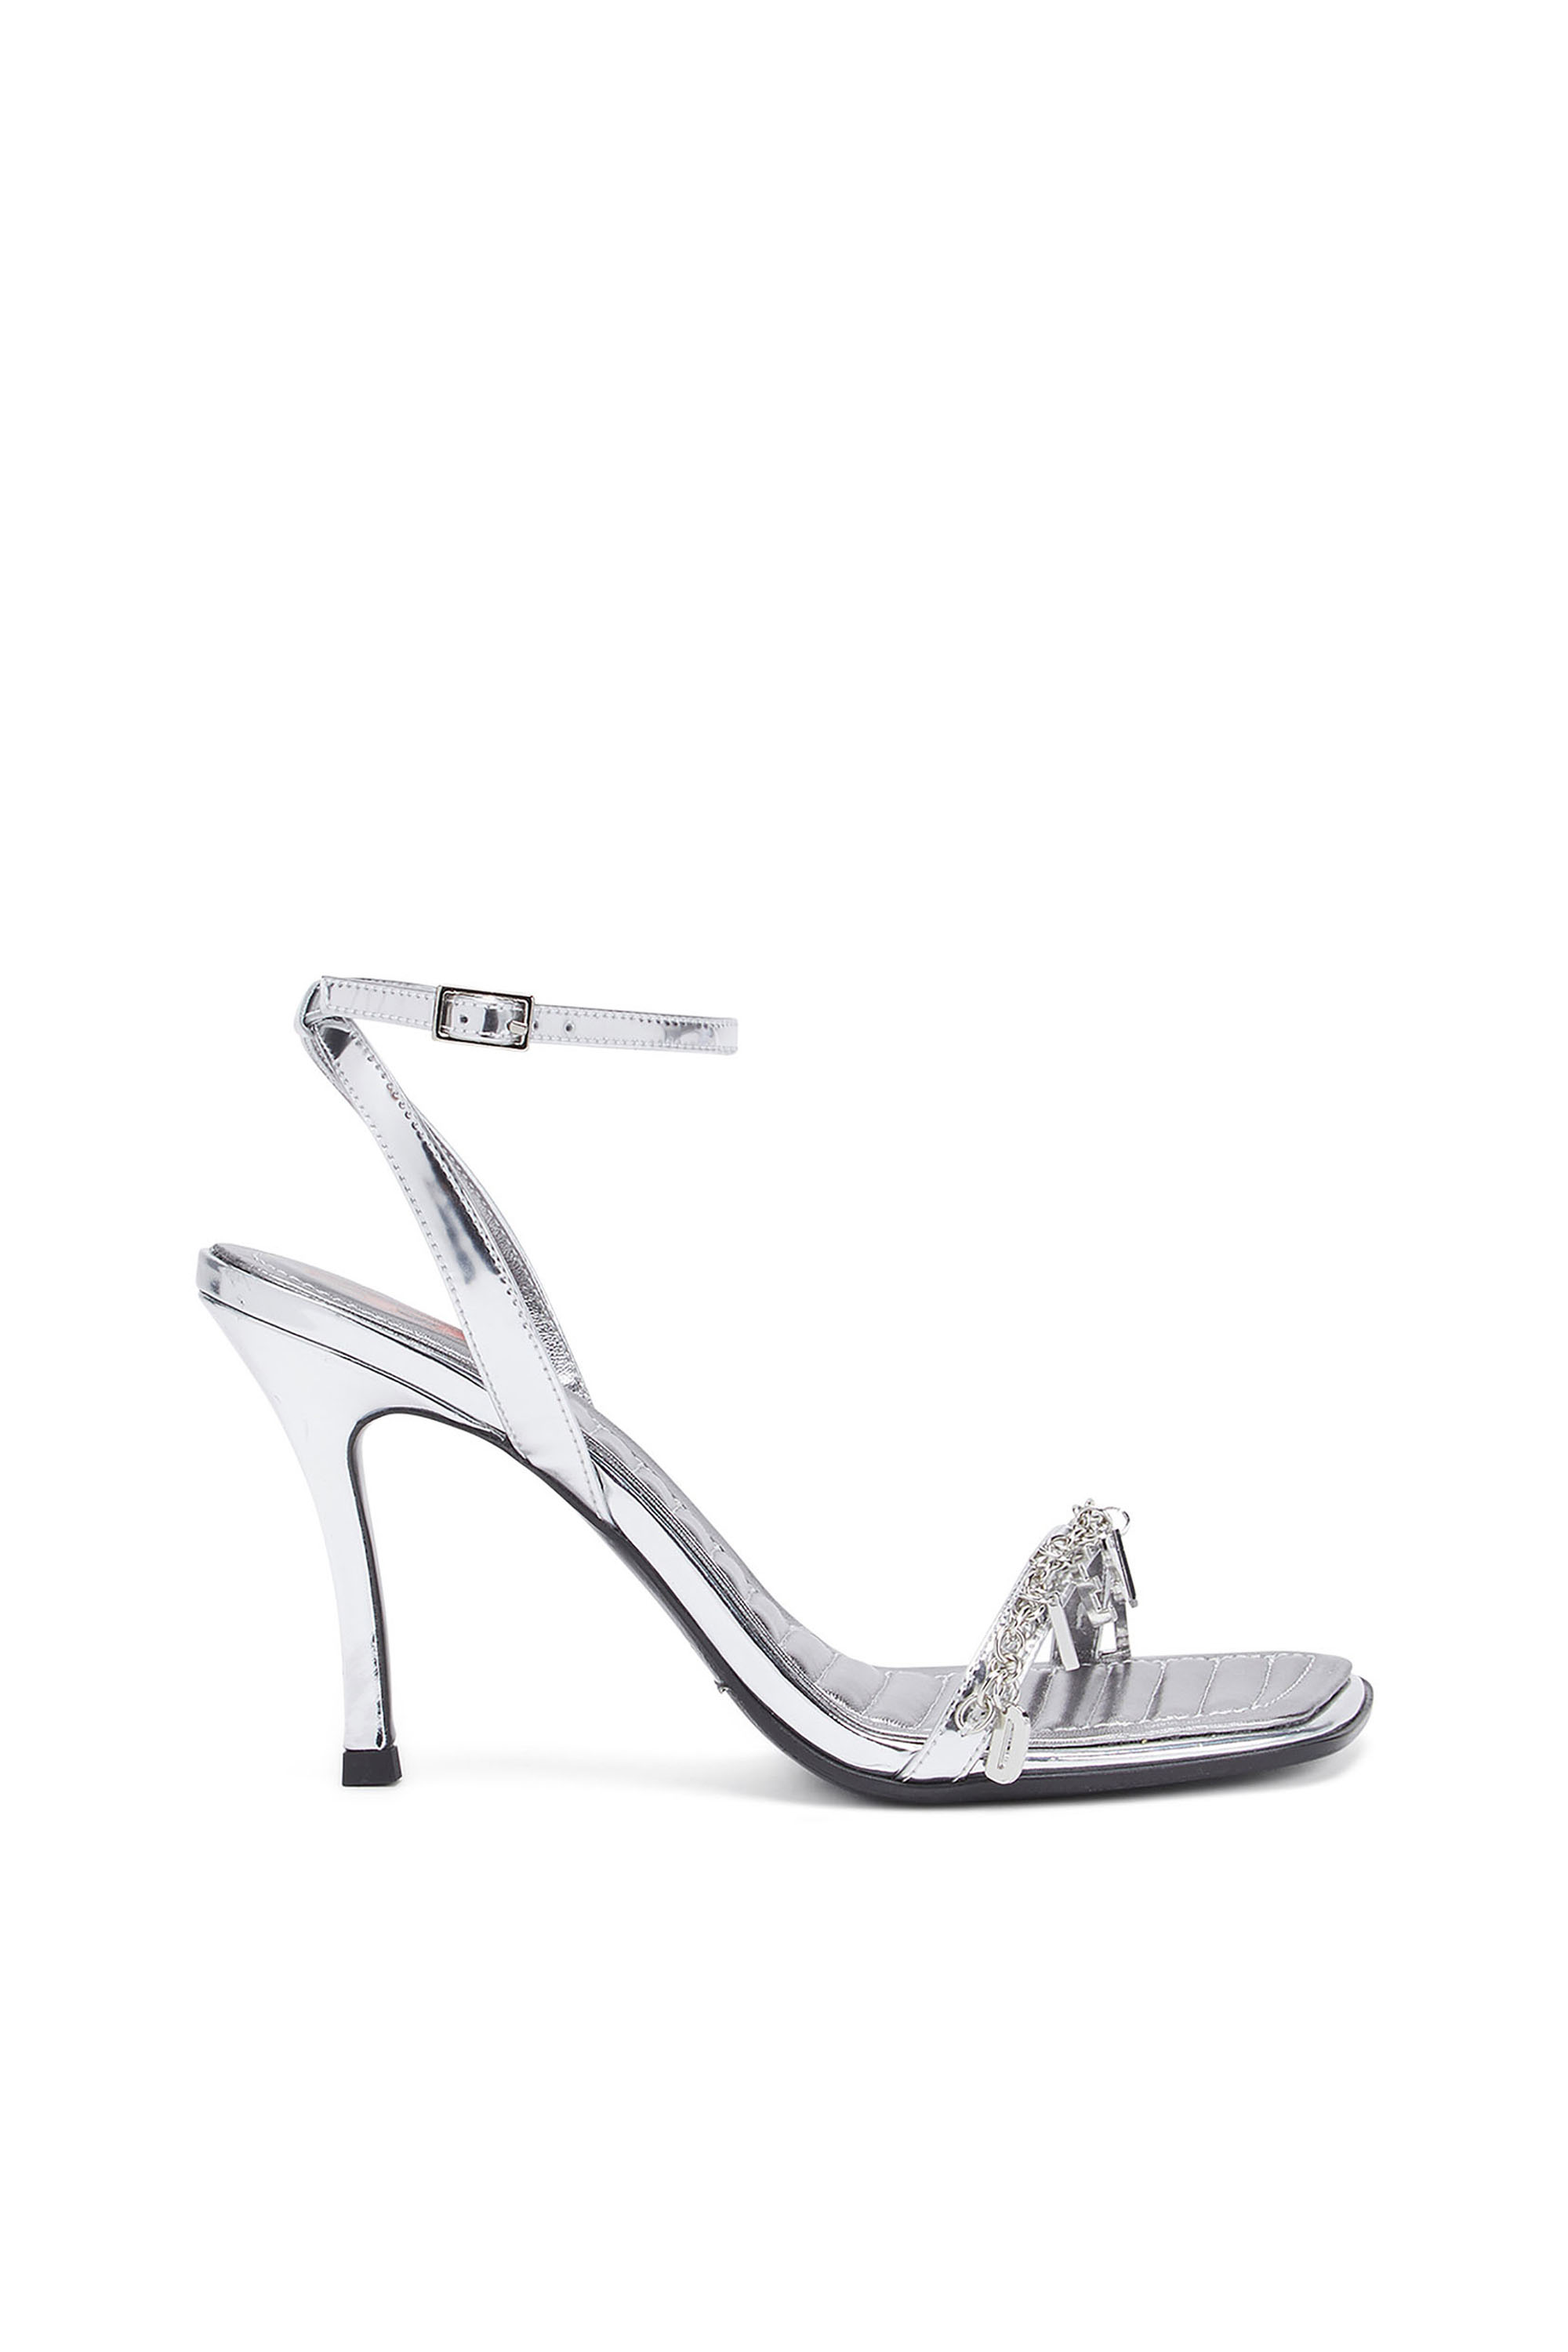 Diesel - D-VINA SDL, Woman D-Vina-Strappy sandals in metallic leather in Silver - Image 1